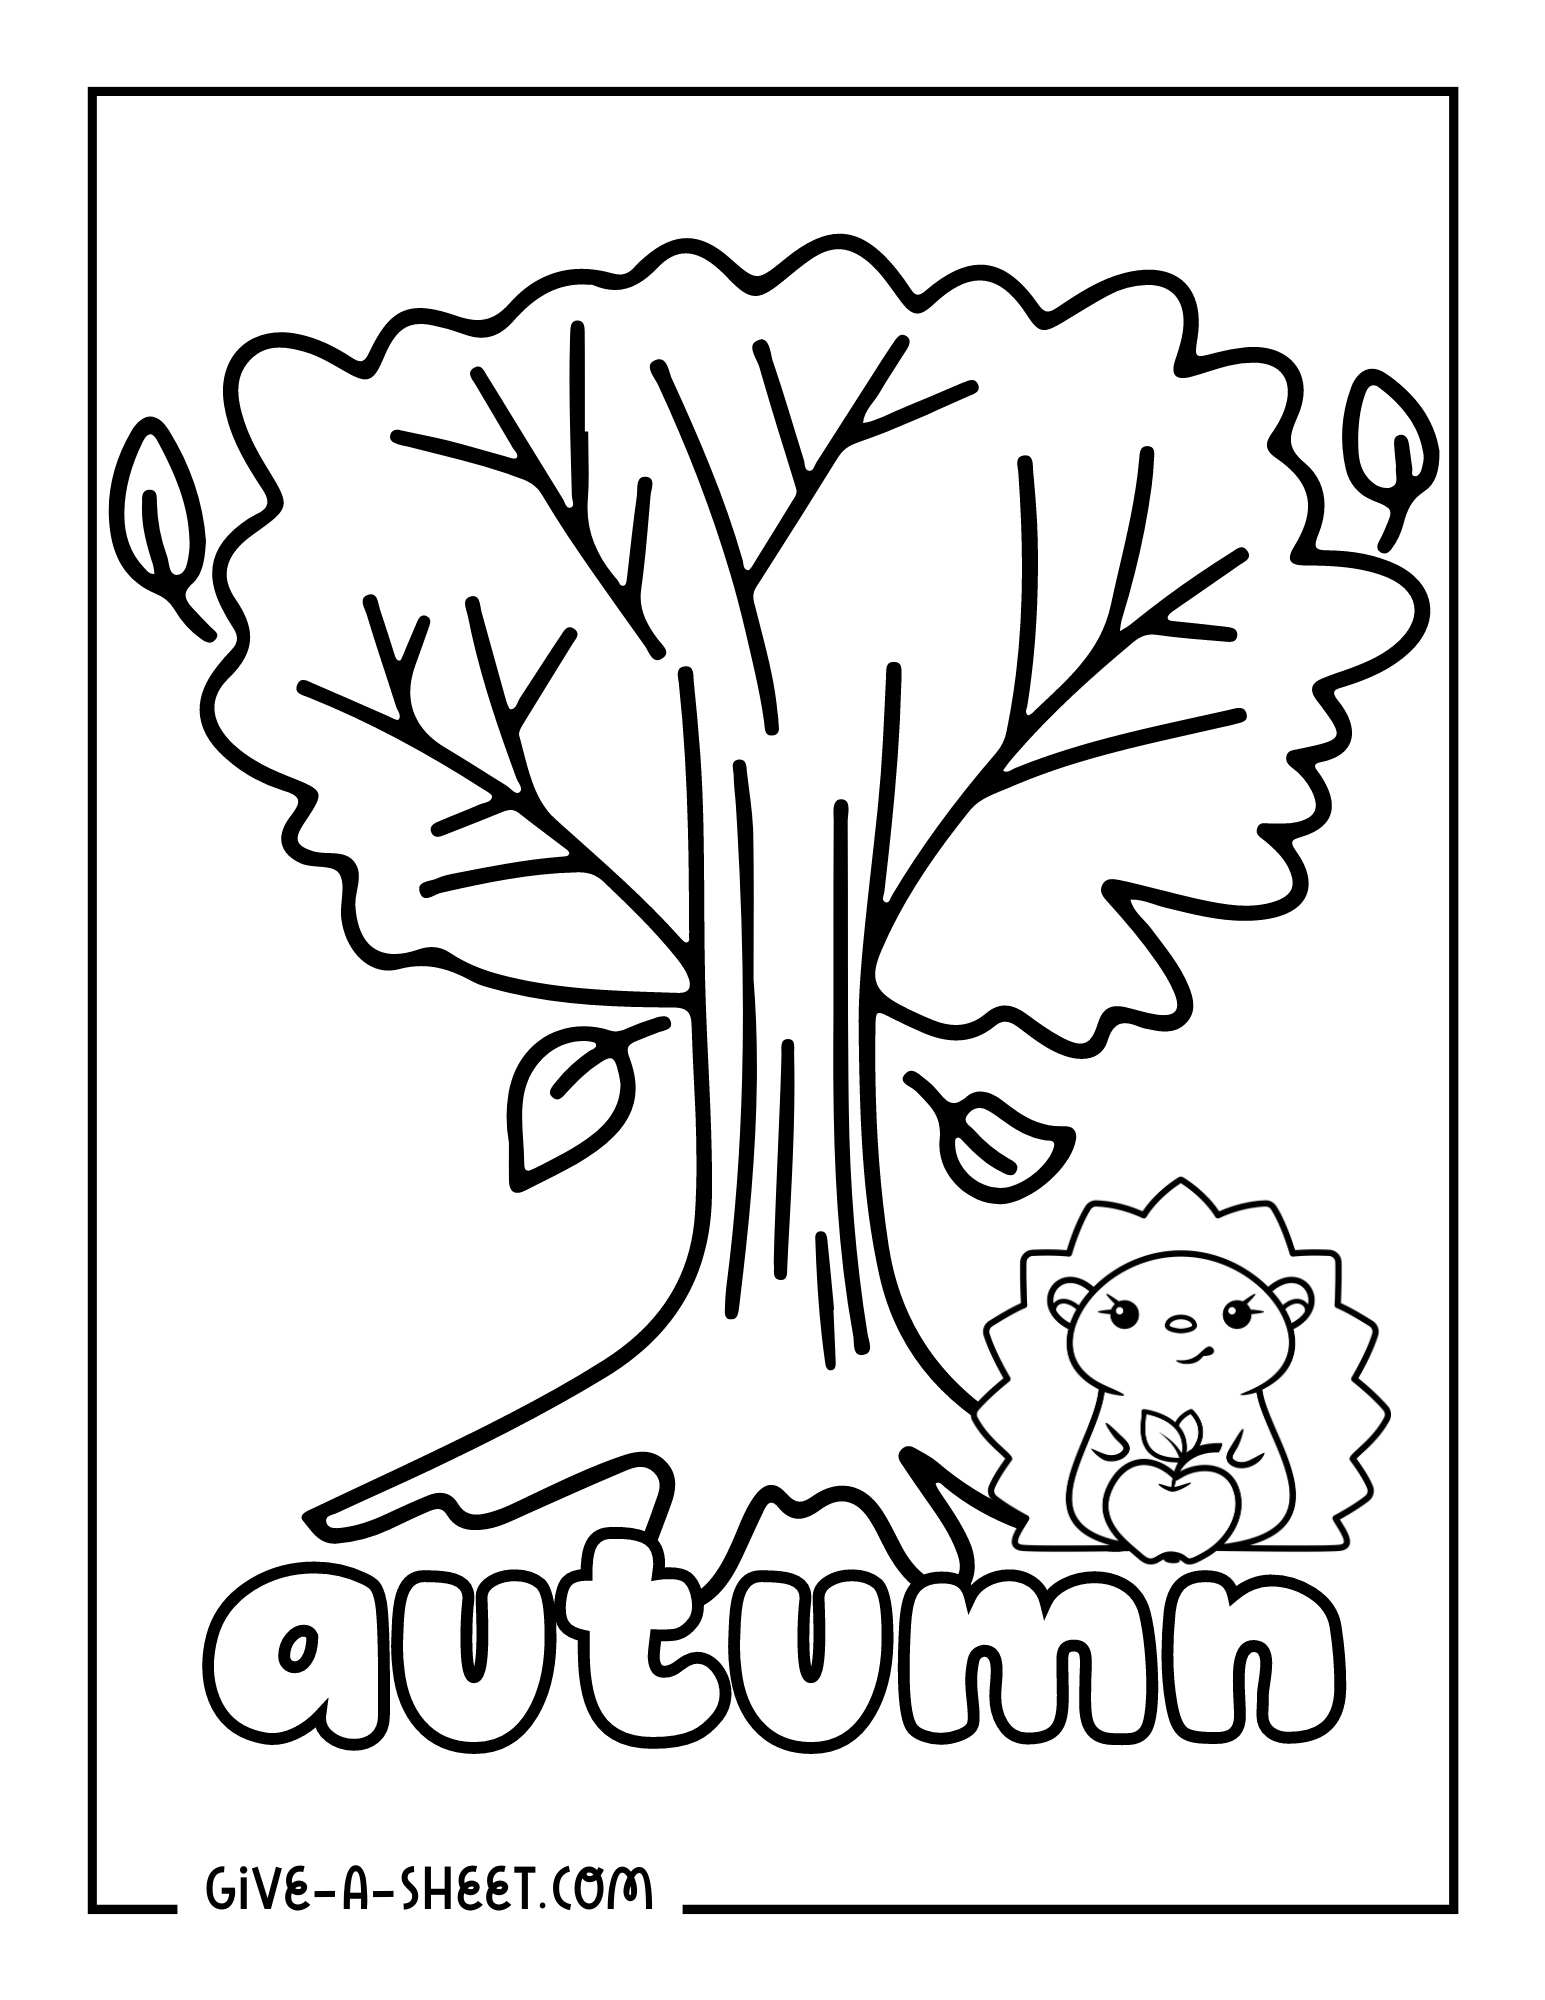 Autumn leaves coloring pages for kids.